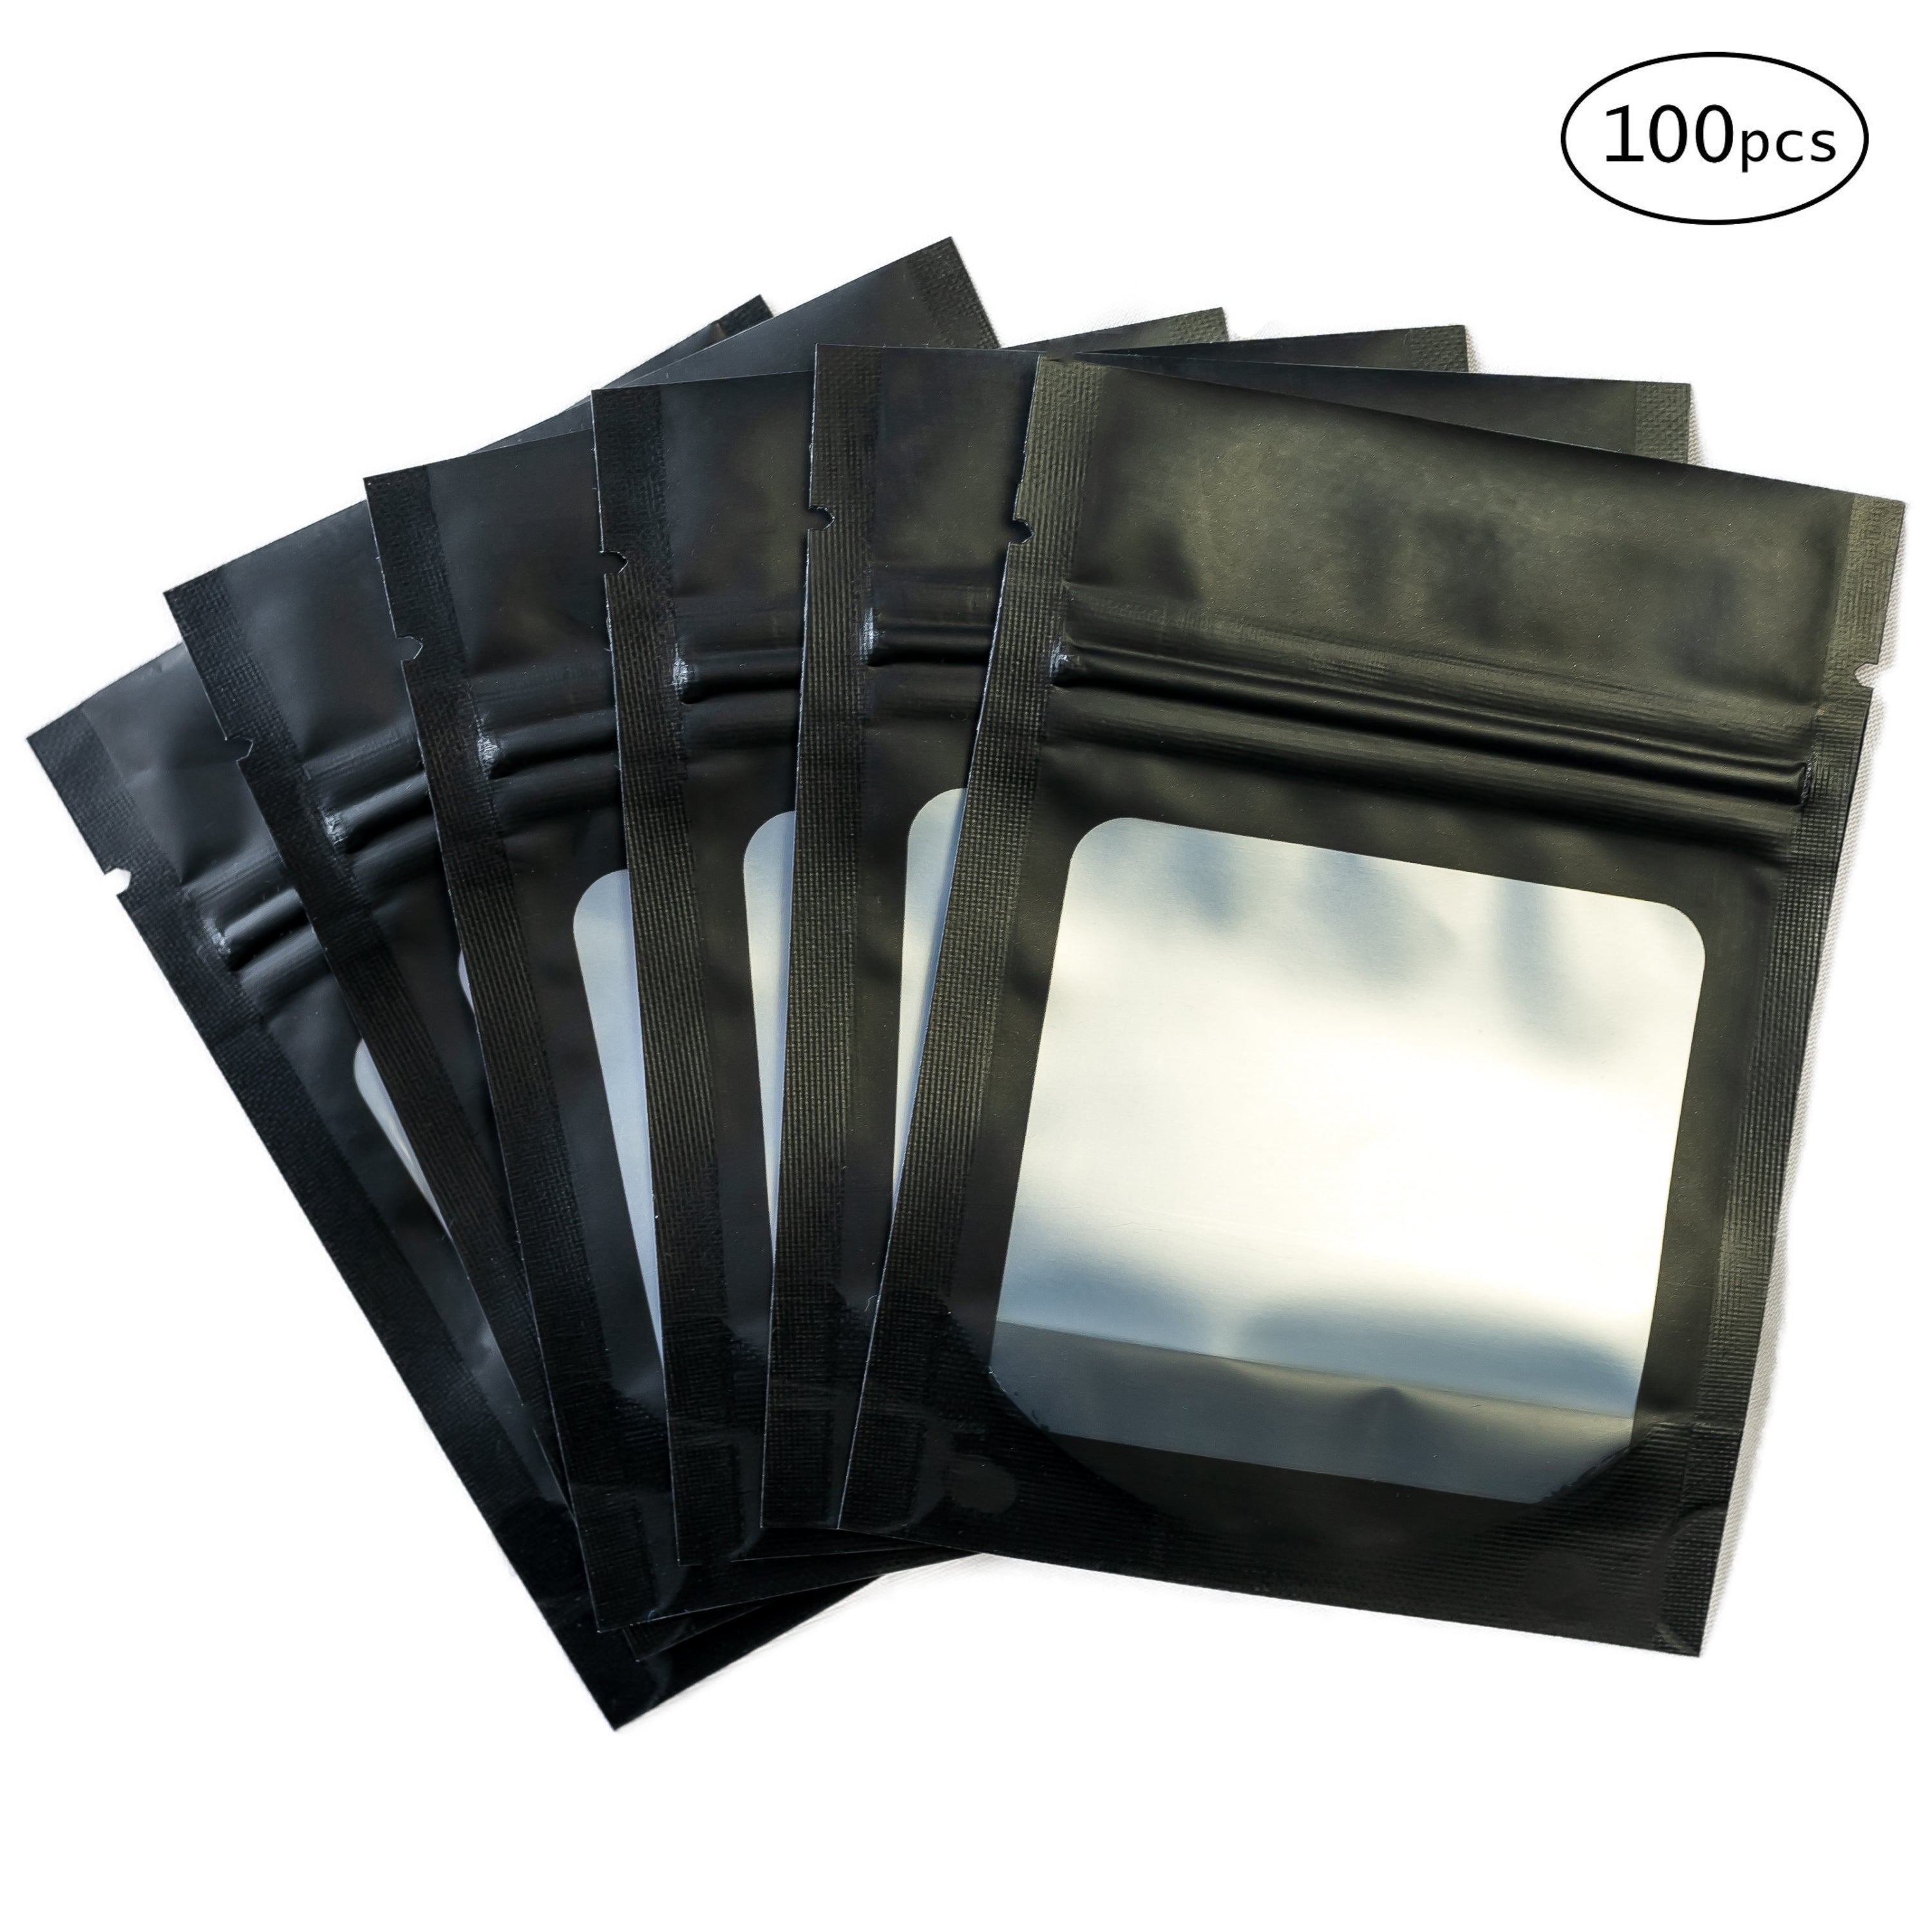 100 Pieces Mylar Bags Smell Proof Bags Resealable Bags For Small